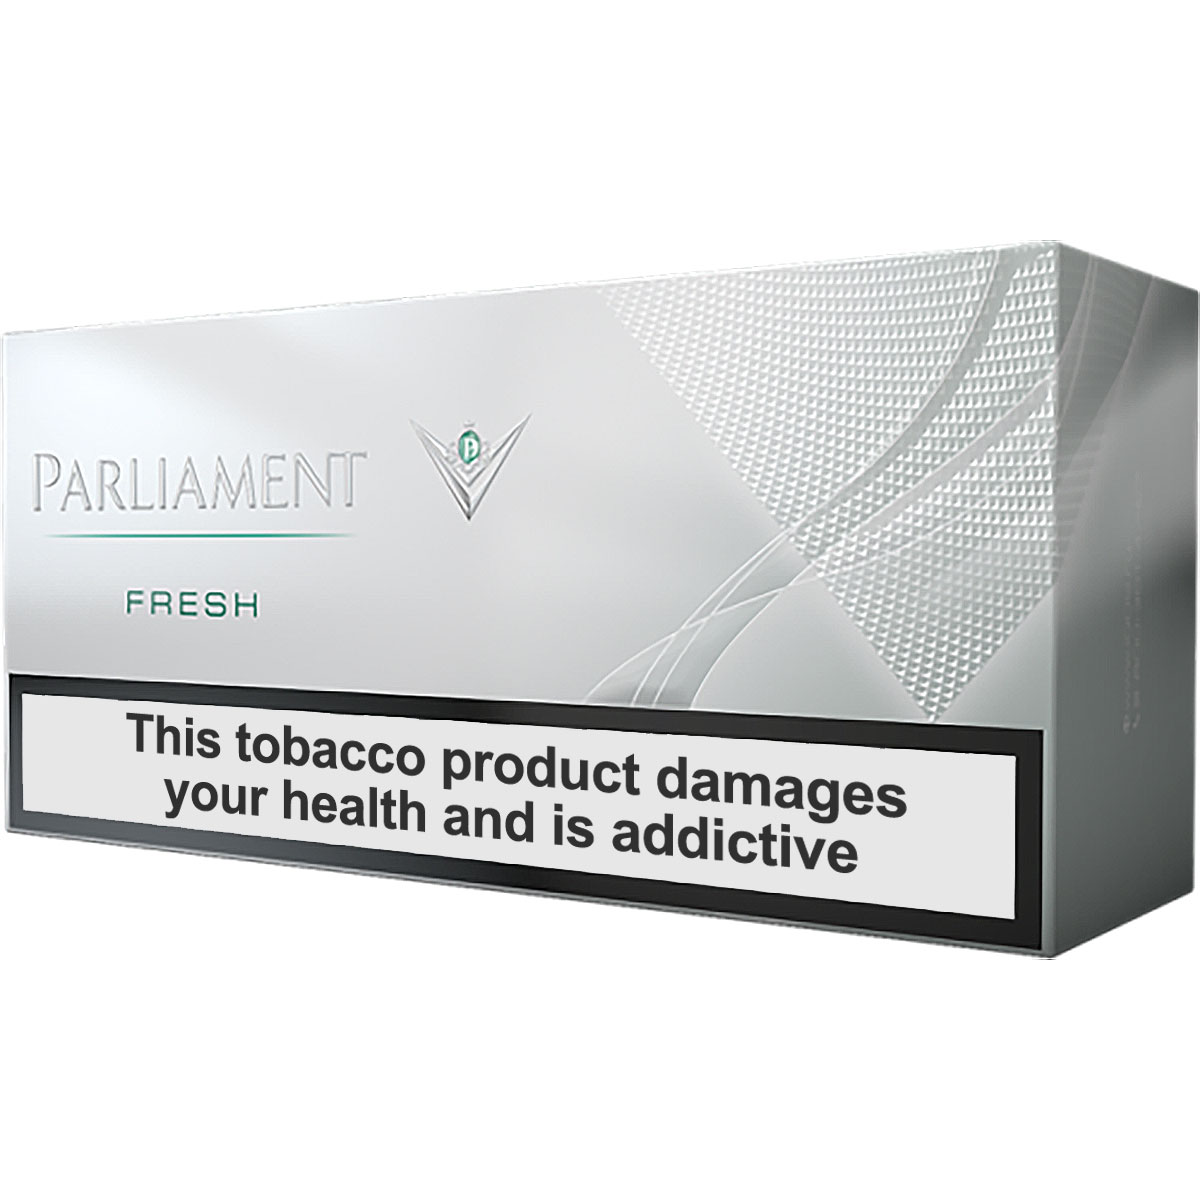 Parliament - Fresh Limited Edition - Buy Online | Heated Products USA